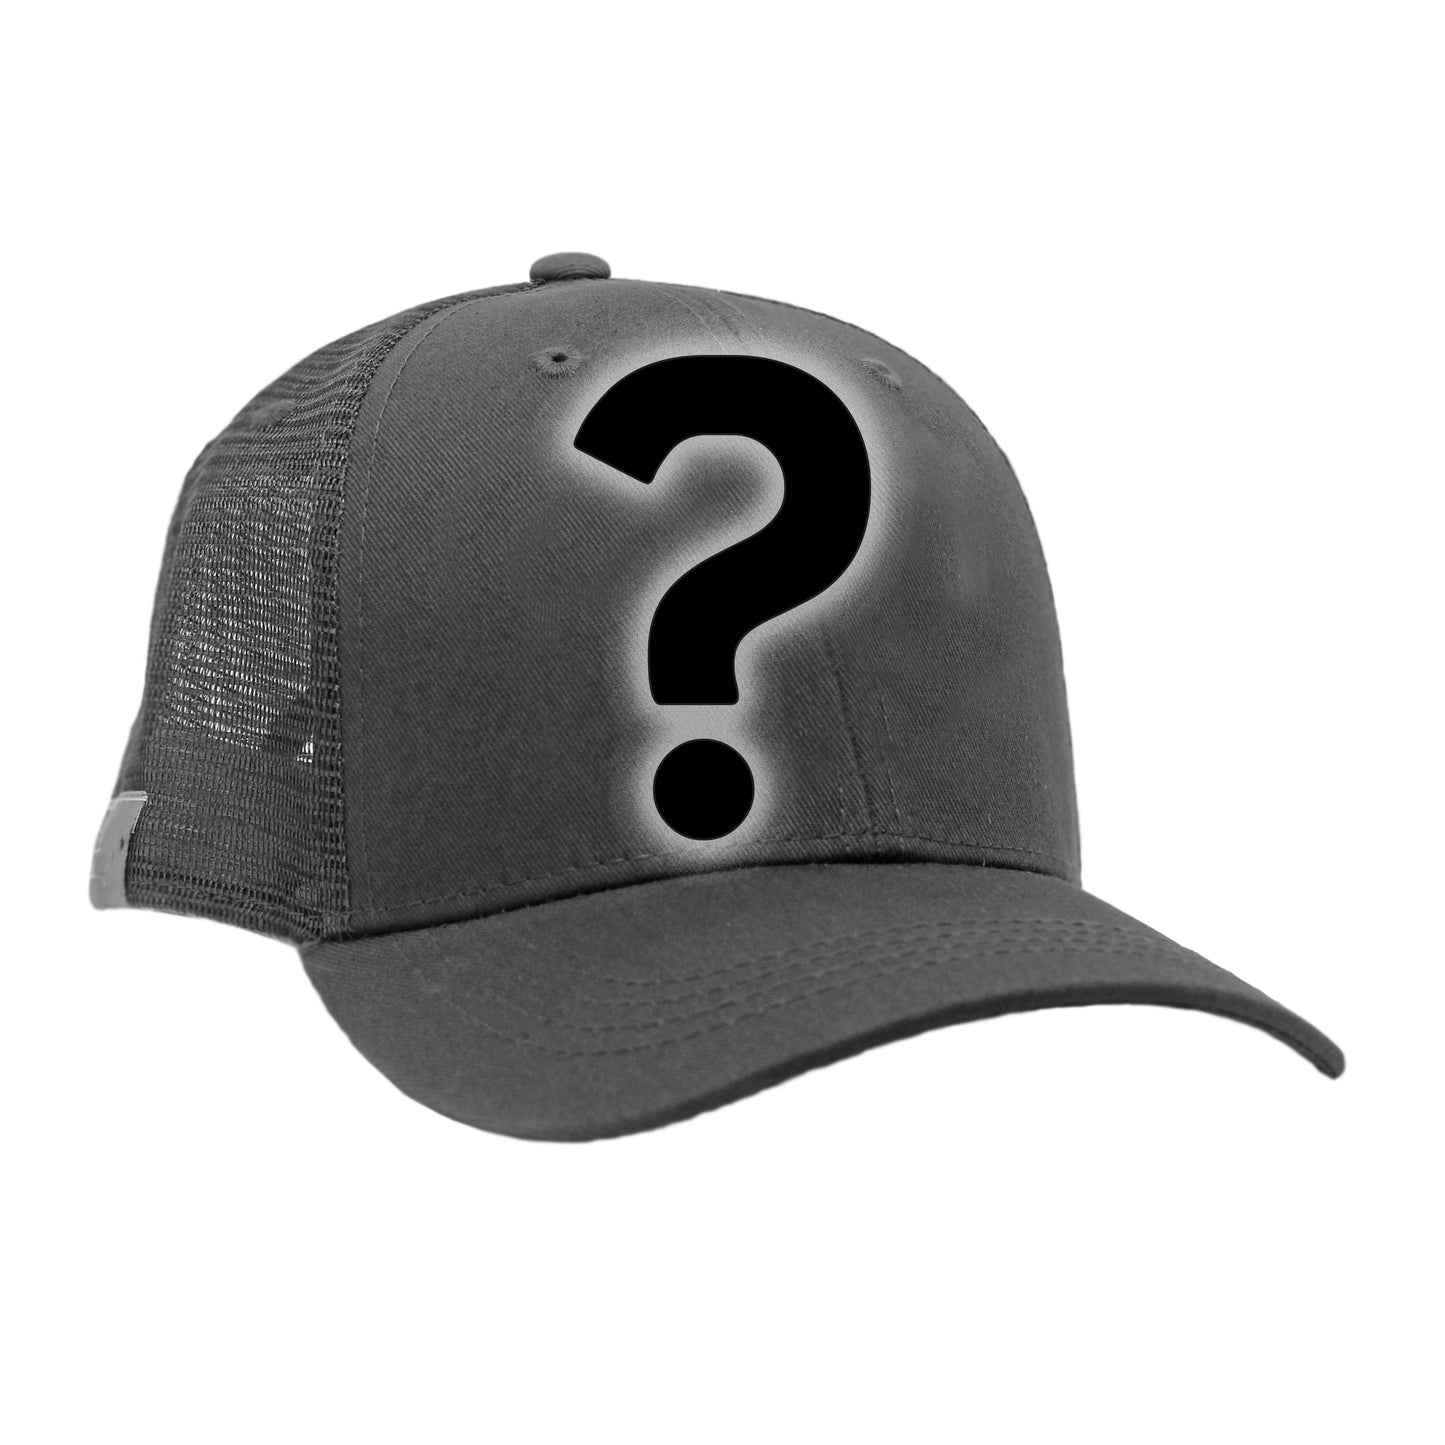 A silhouette of a brimmed hat with a question mark overlaying it